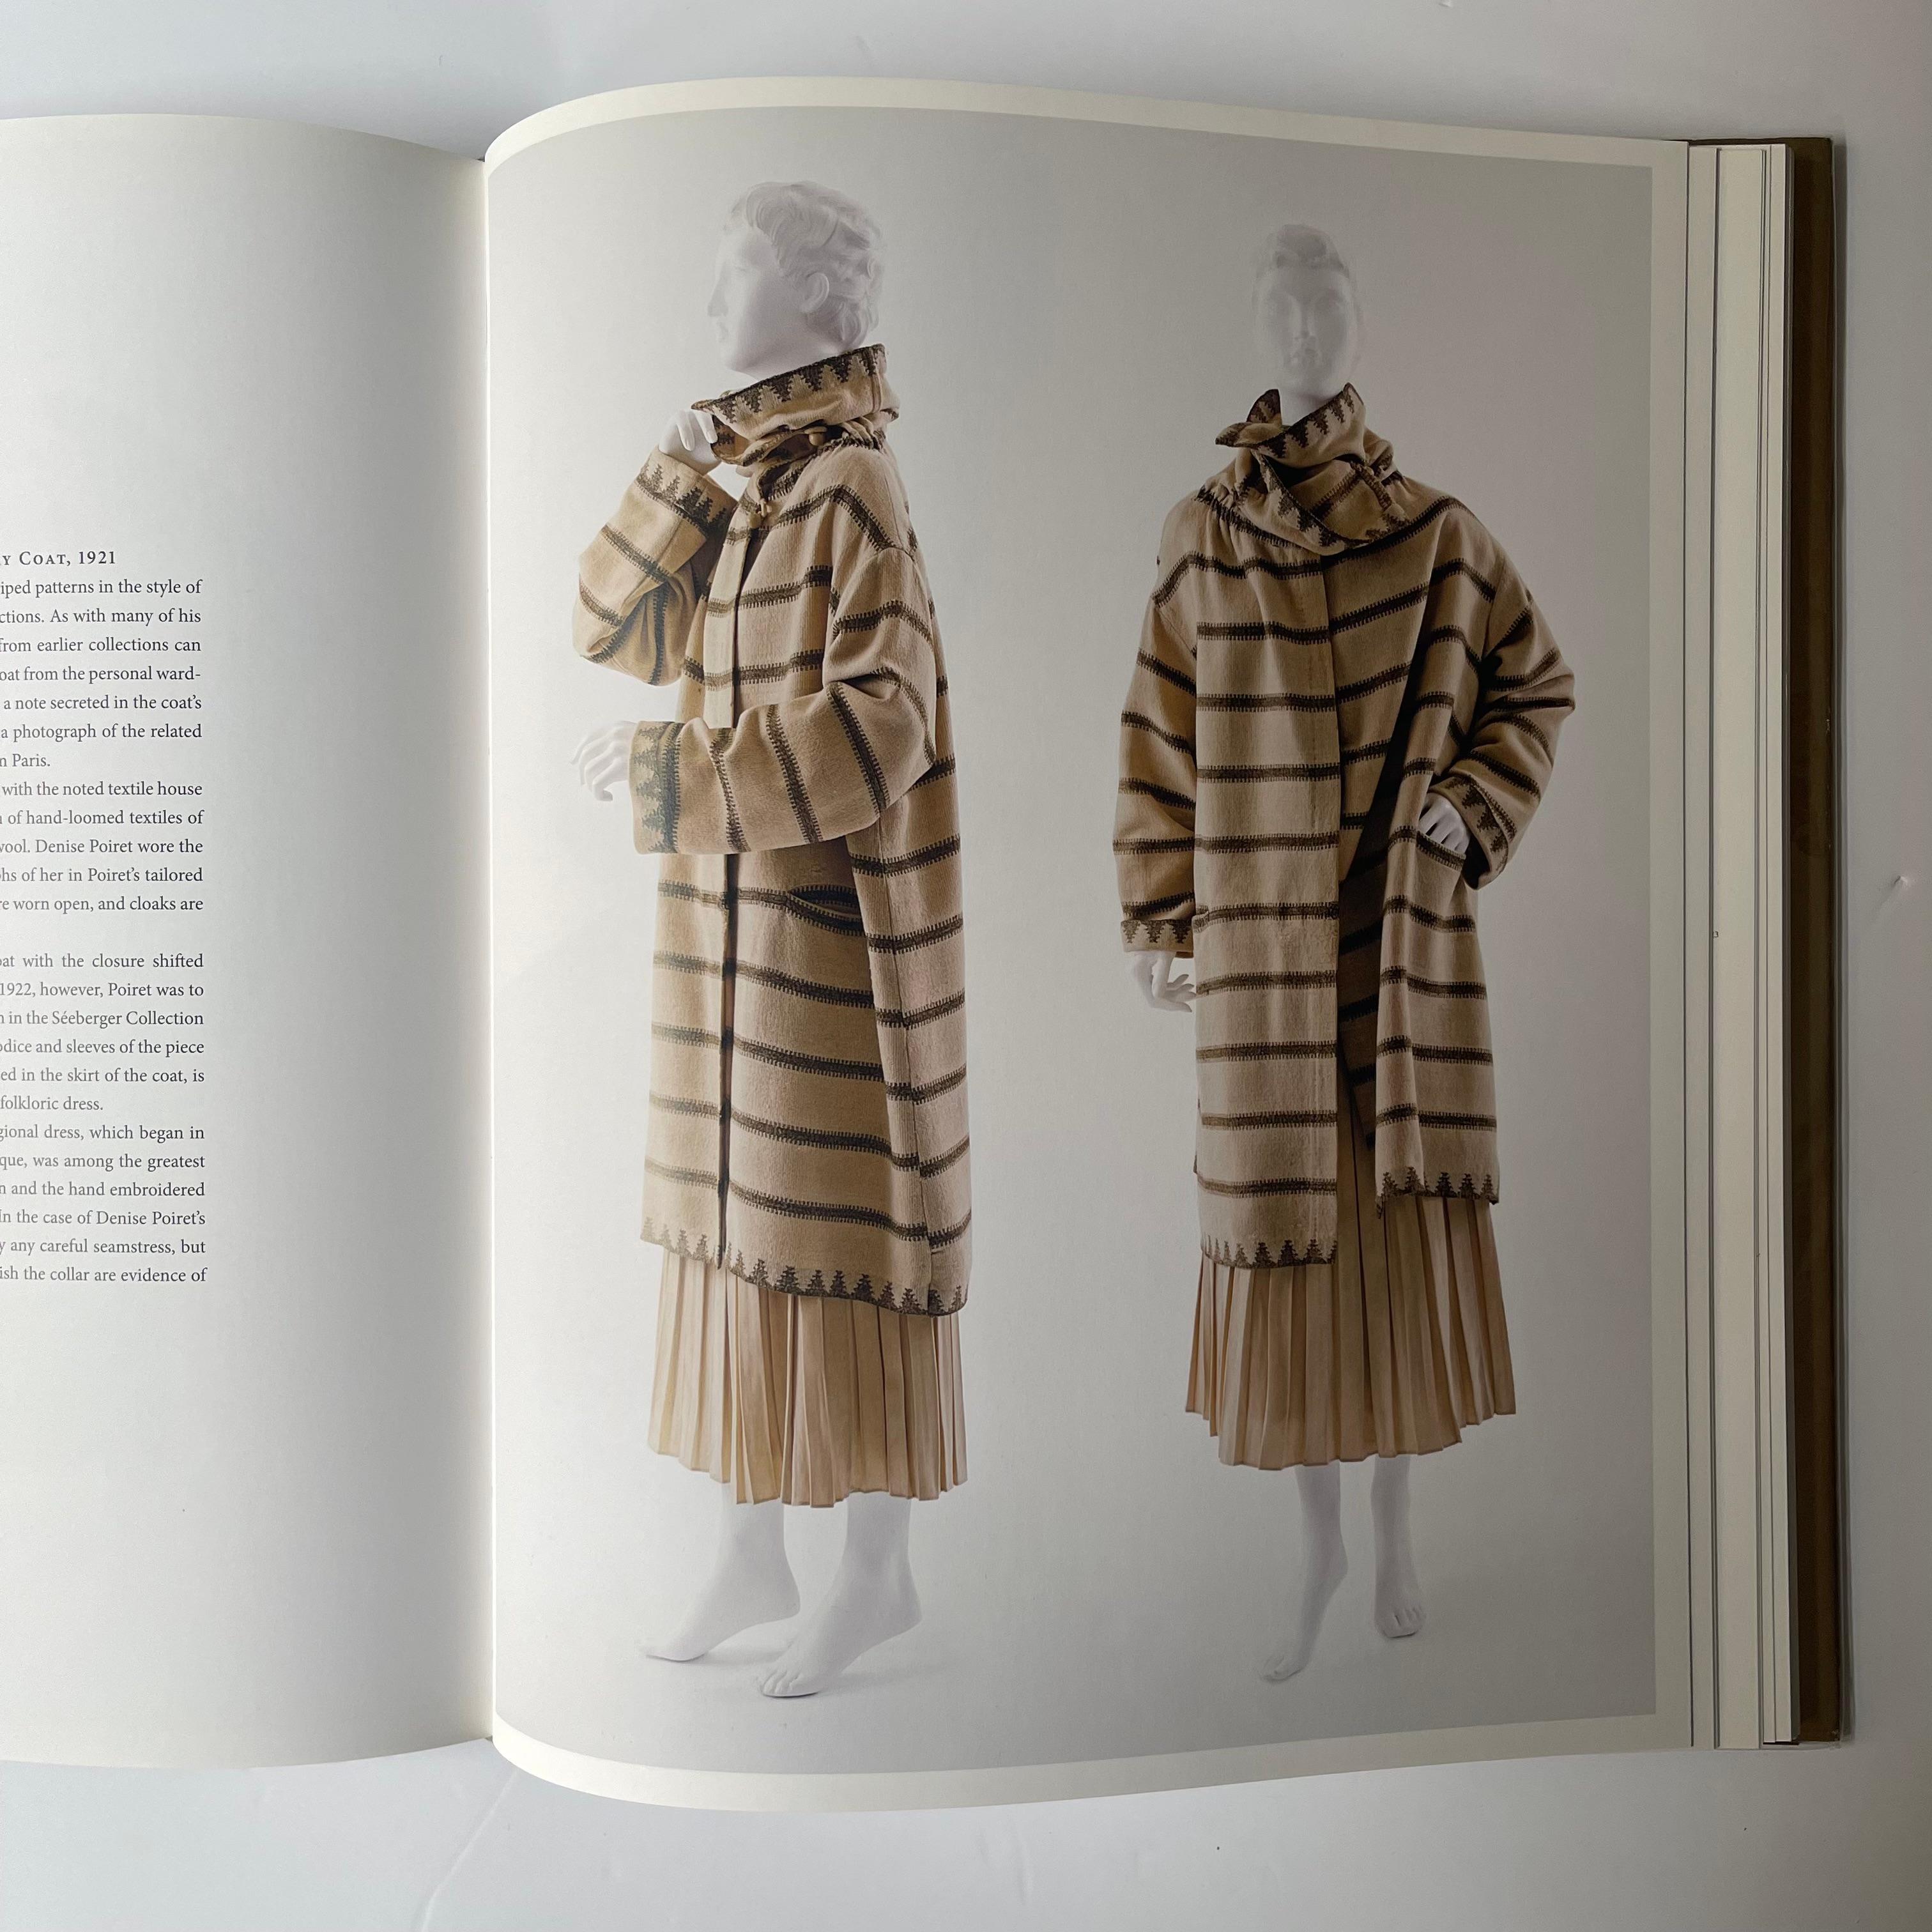 Paul Poiret published By Harold Koda Metropolitan Museum of Art, New York 2007. 

Hardback in dust jacket and glasene protective wrappers. Catalogue of the exhibition 